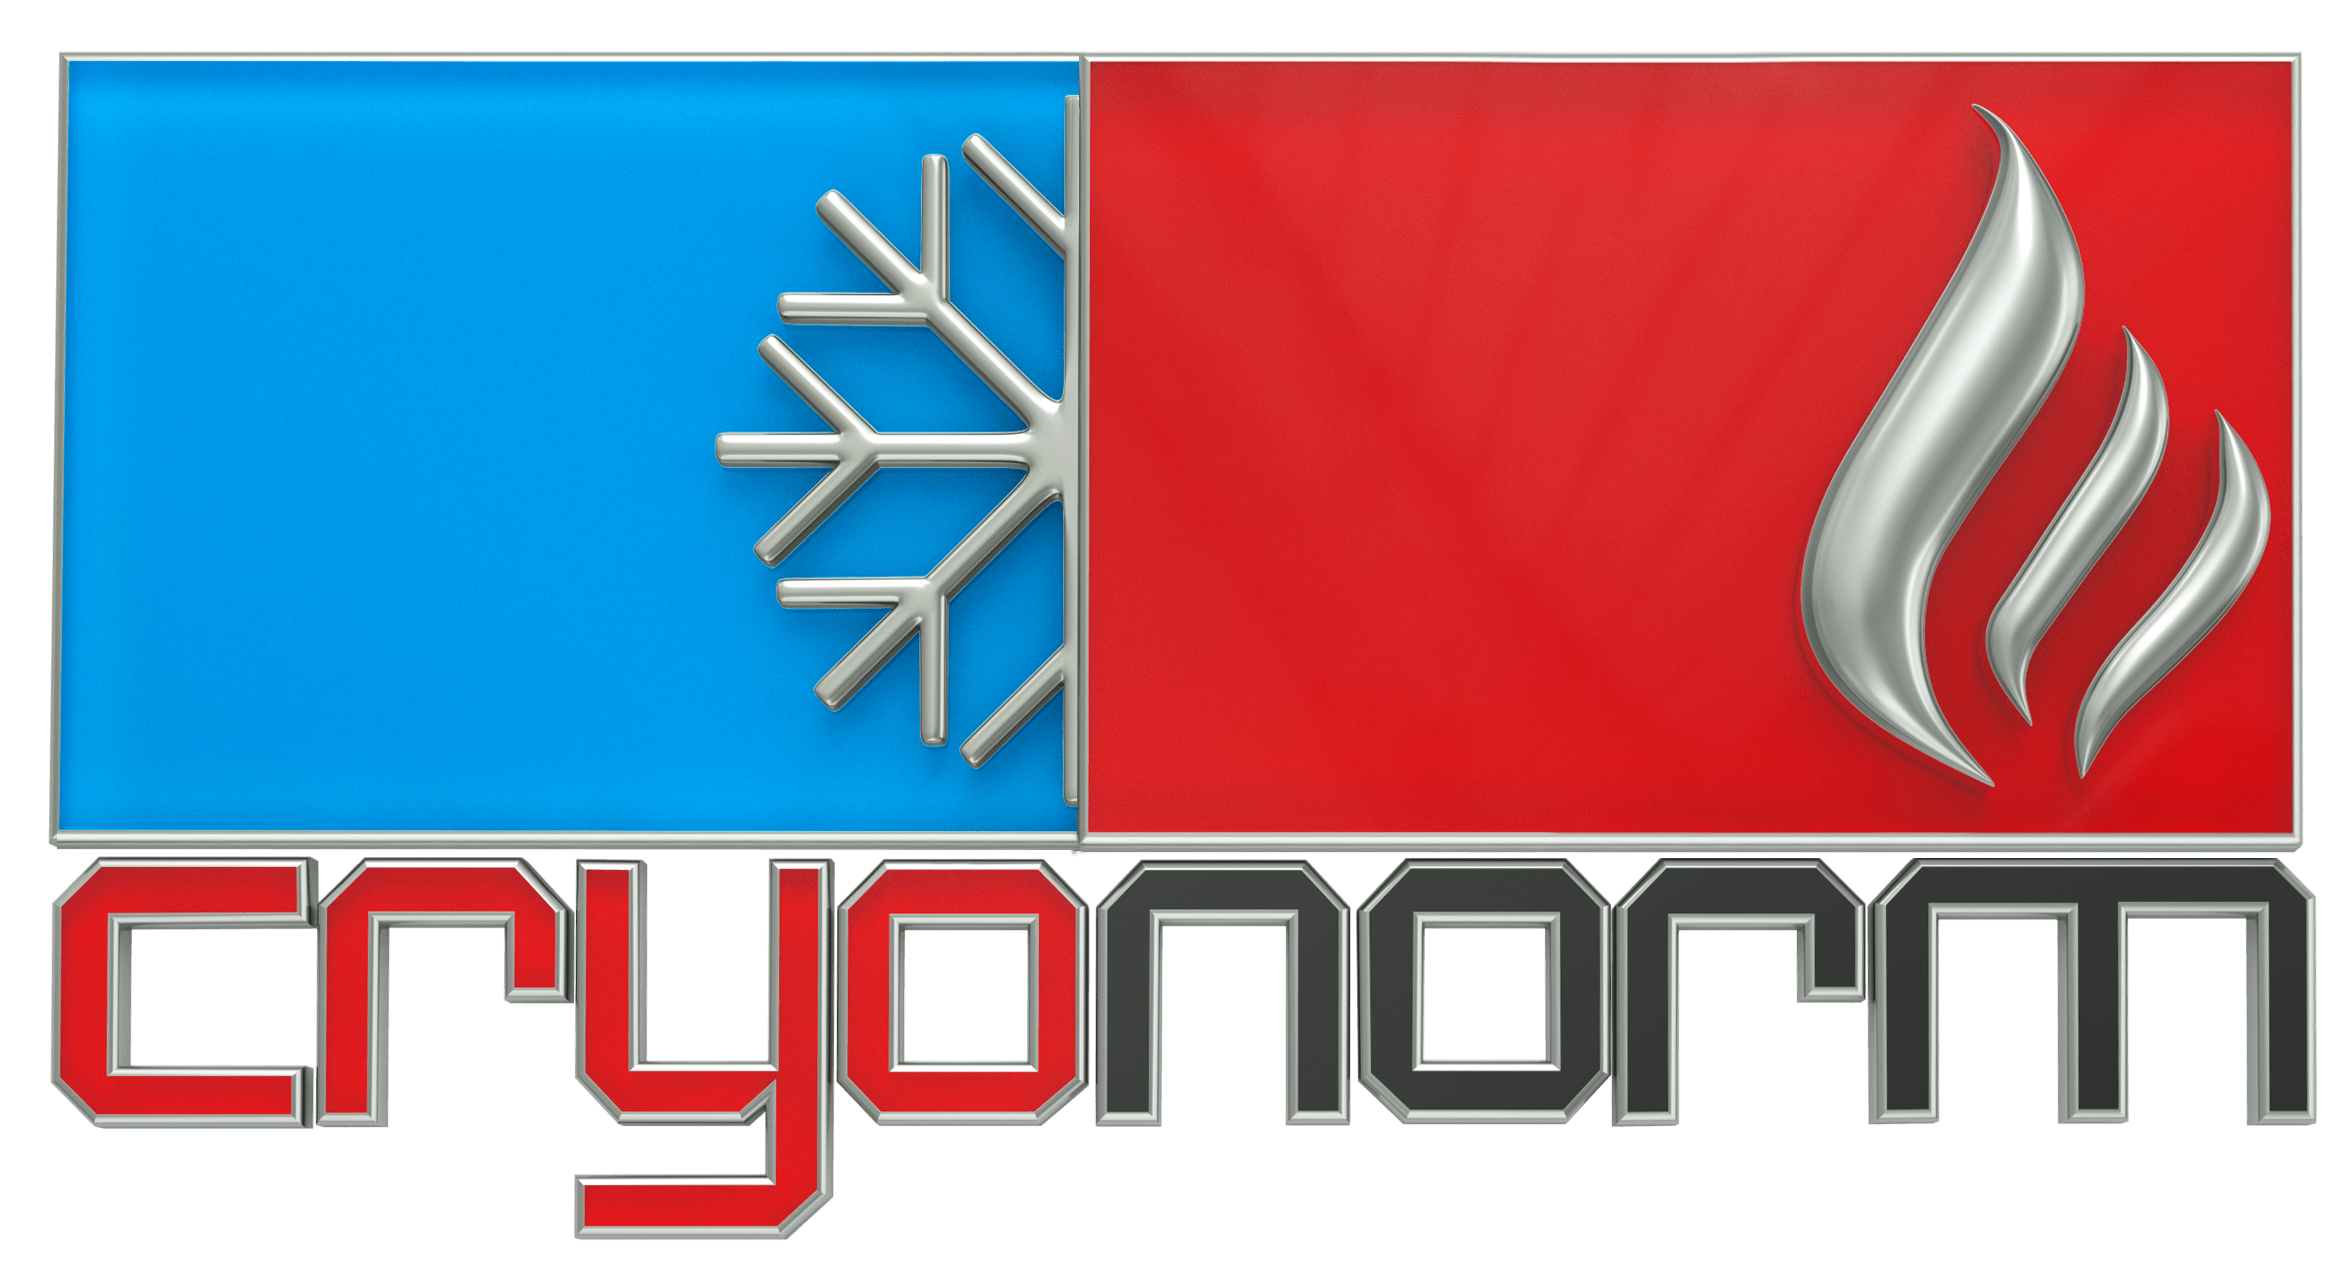 Cryogenic Logo - Cryogenic vaporizers and plants for Air Gases and LNG | Cryonorm B.V.